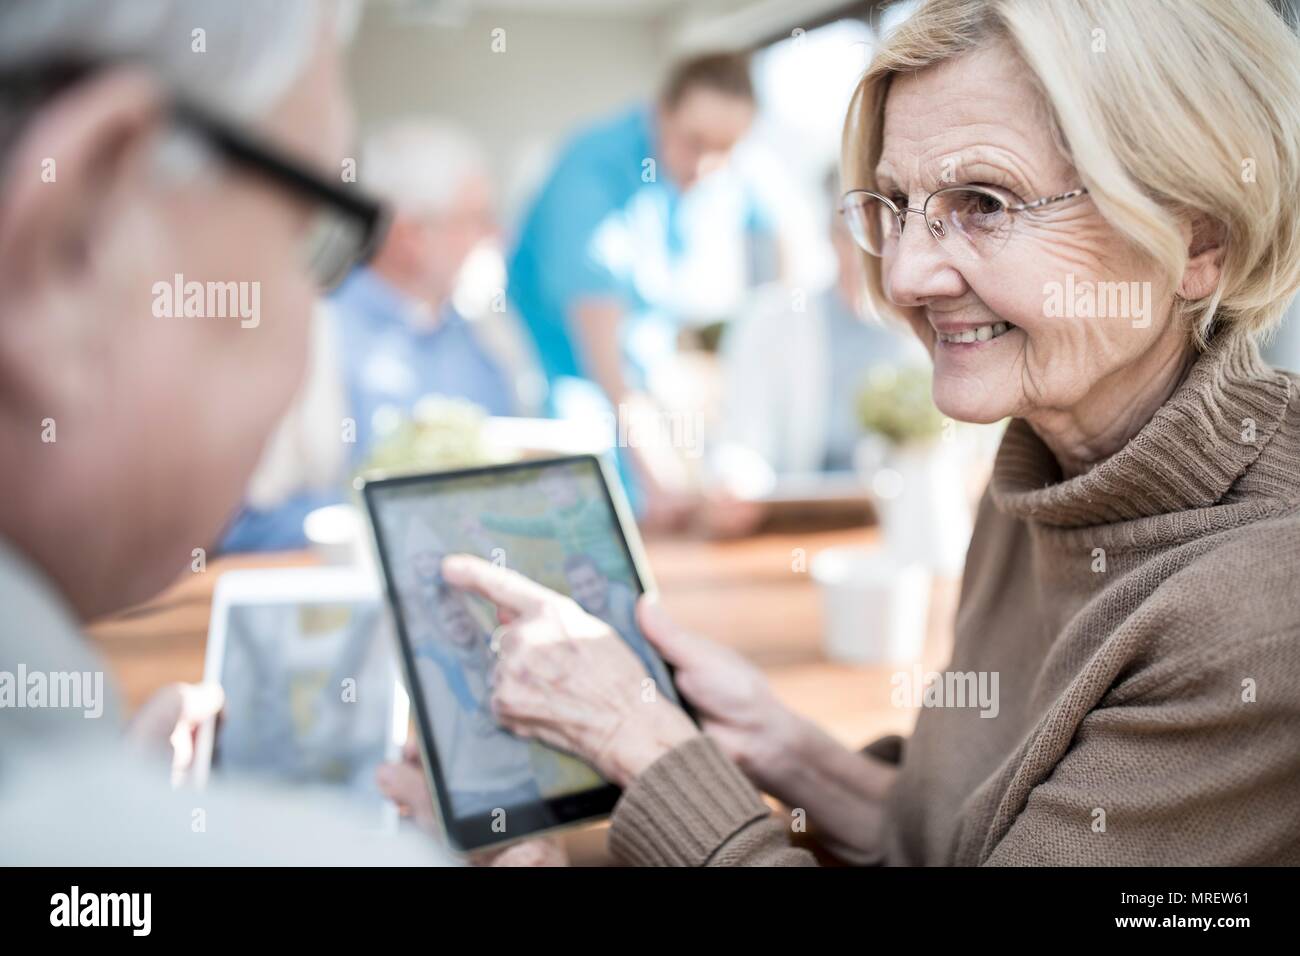 Senior adults looking at photos on digital tablet in care home. Stock Photo